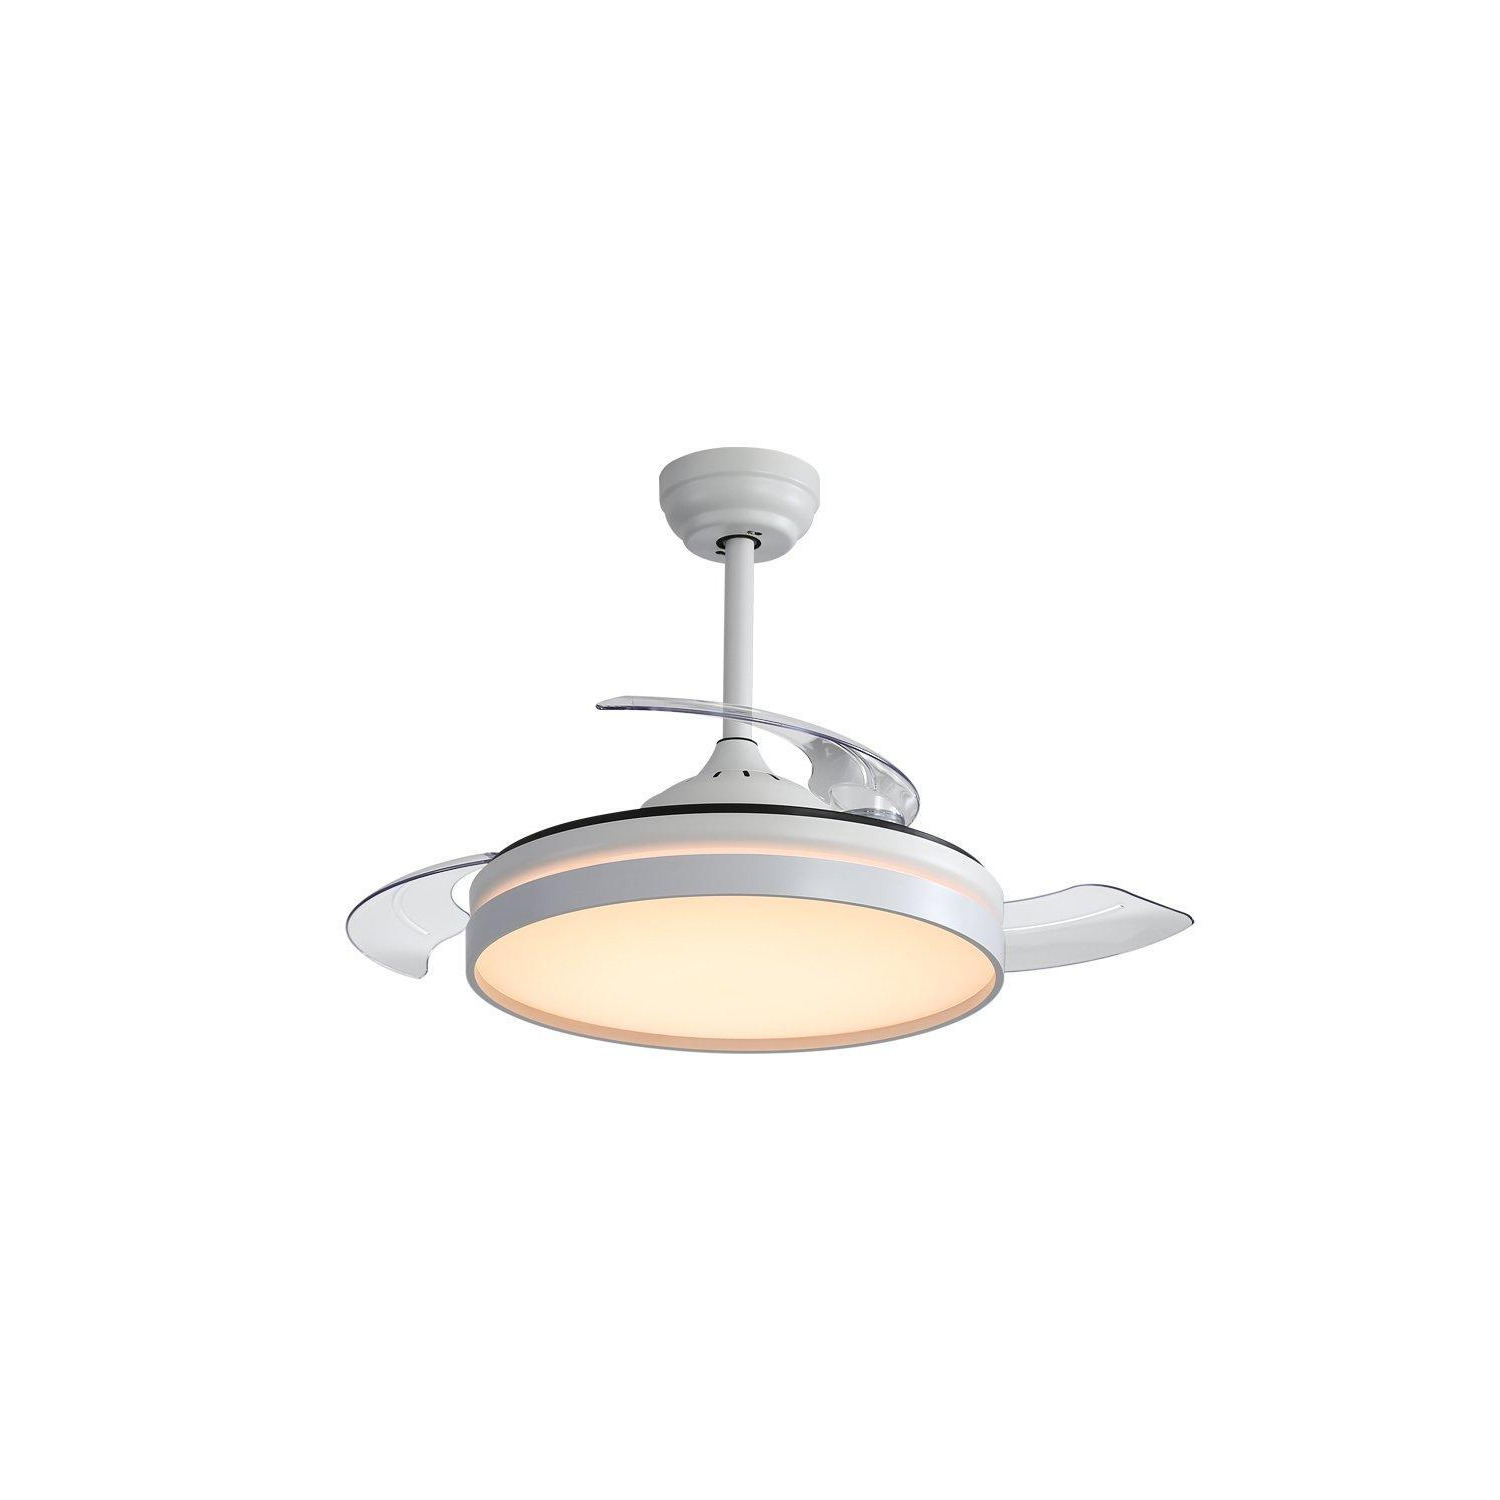 Acrylic Ceiling Fan Light with Retracted Blades - image 1